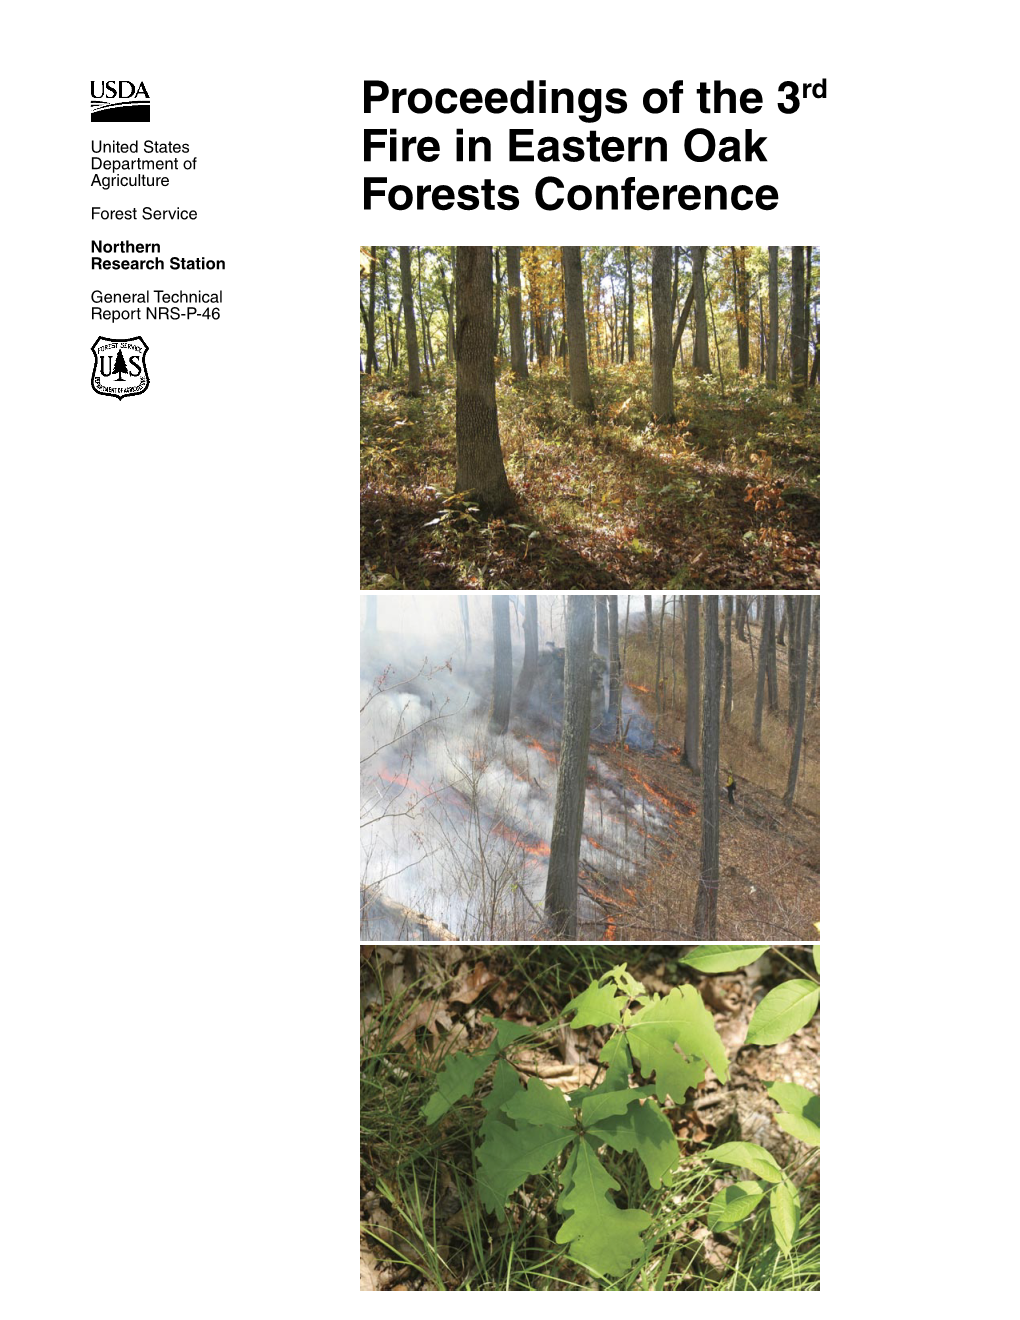 Proceedings of the 3Rd Fire in Eastern Oak Forests Conference